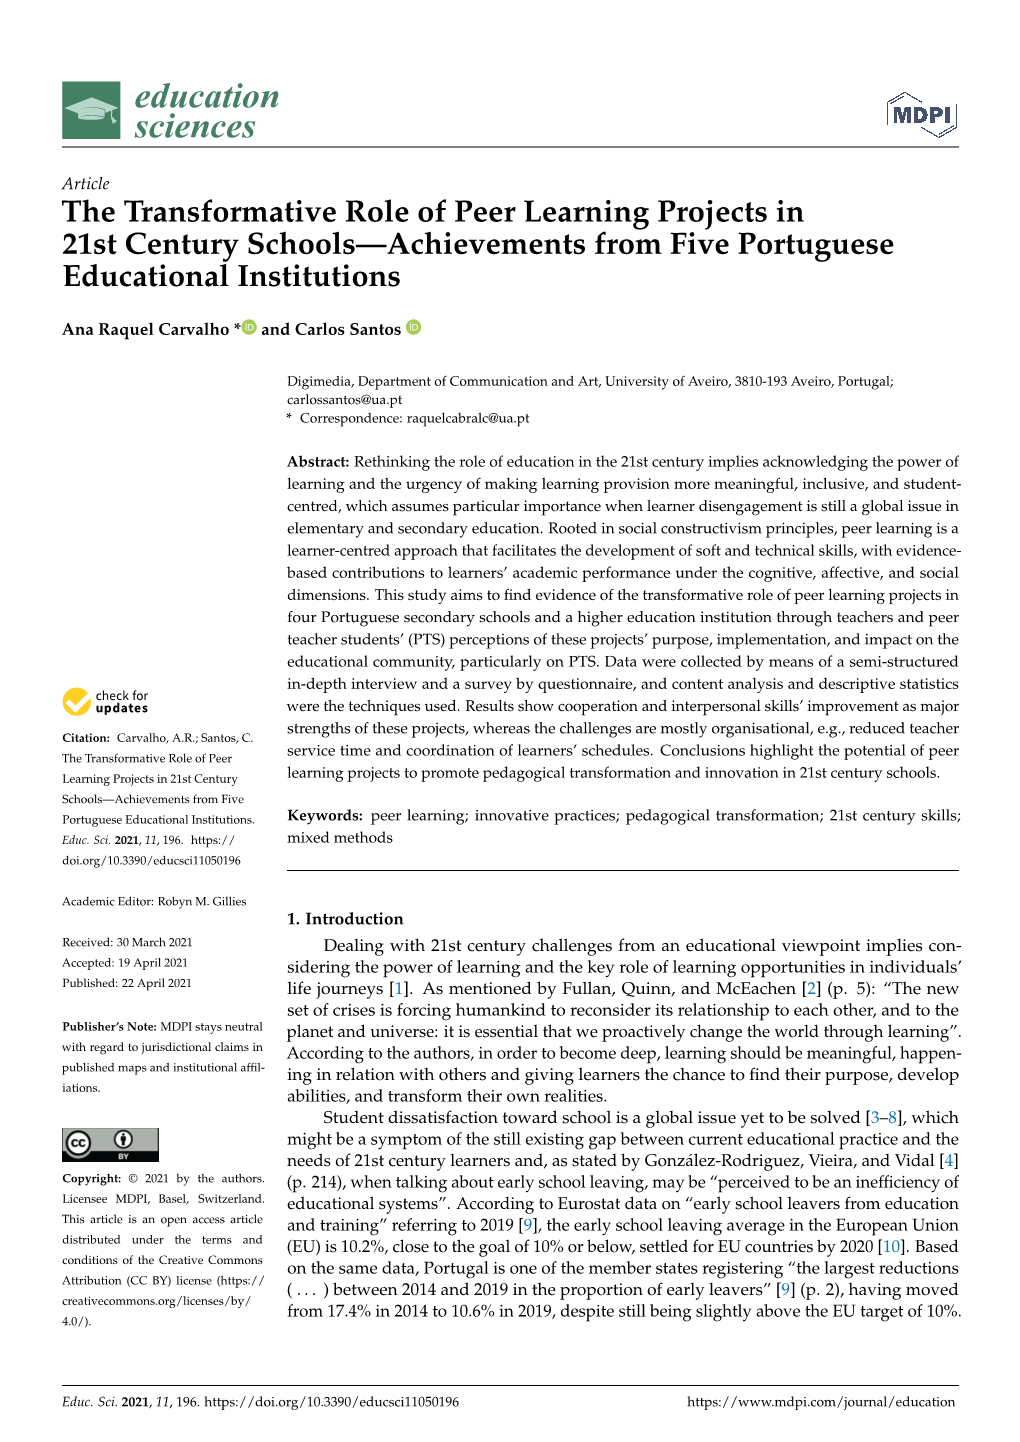 The Transformative Role of Peer Learning Projects in 21St Century Schools—Achievements from Five Portuguese Educational Institutions